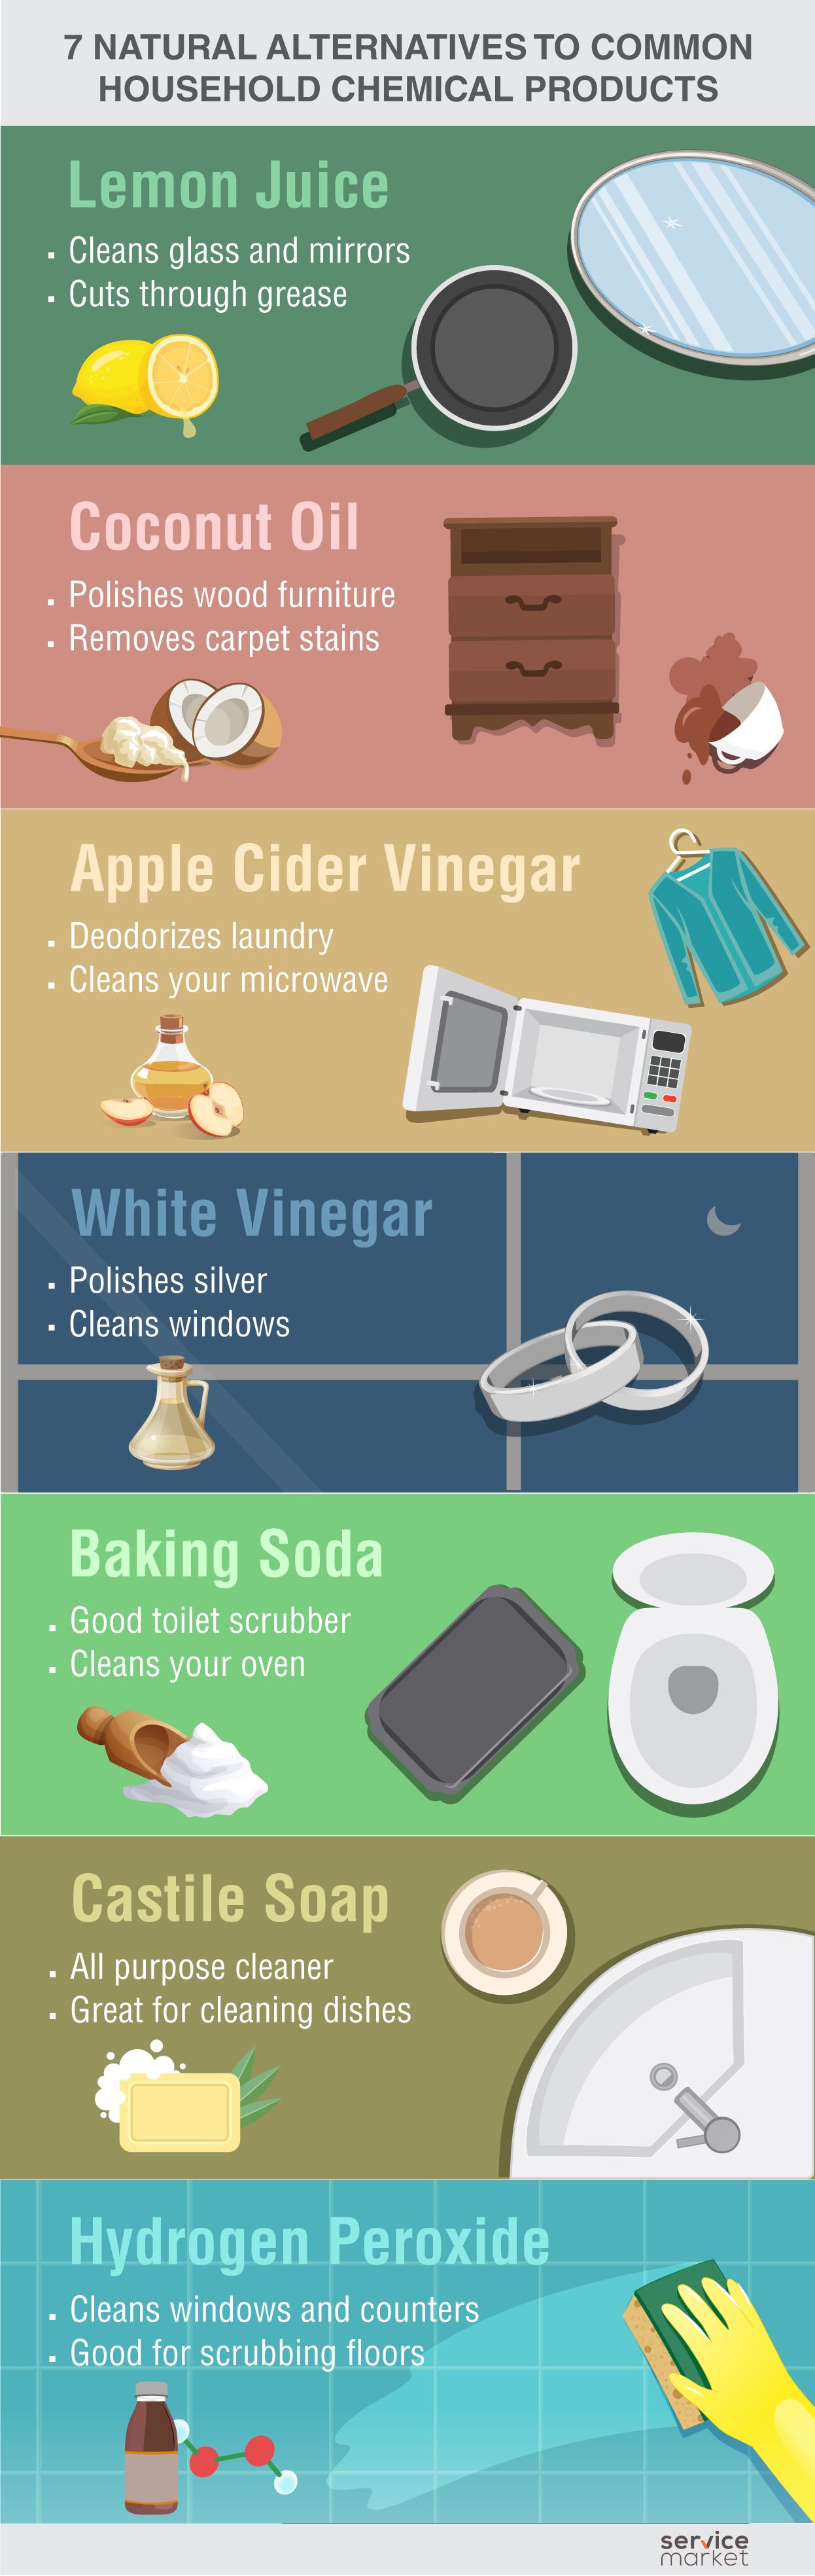 Natural Alternatives to Household Chemical Products - Infographic 